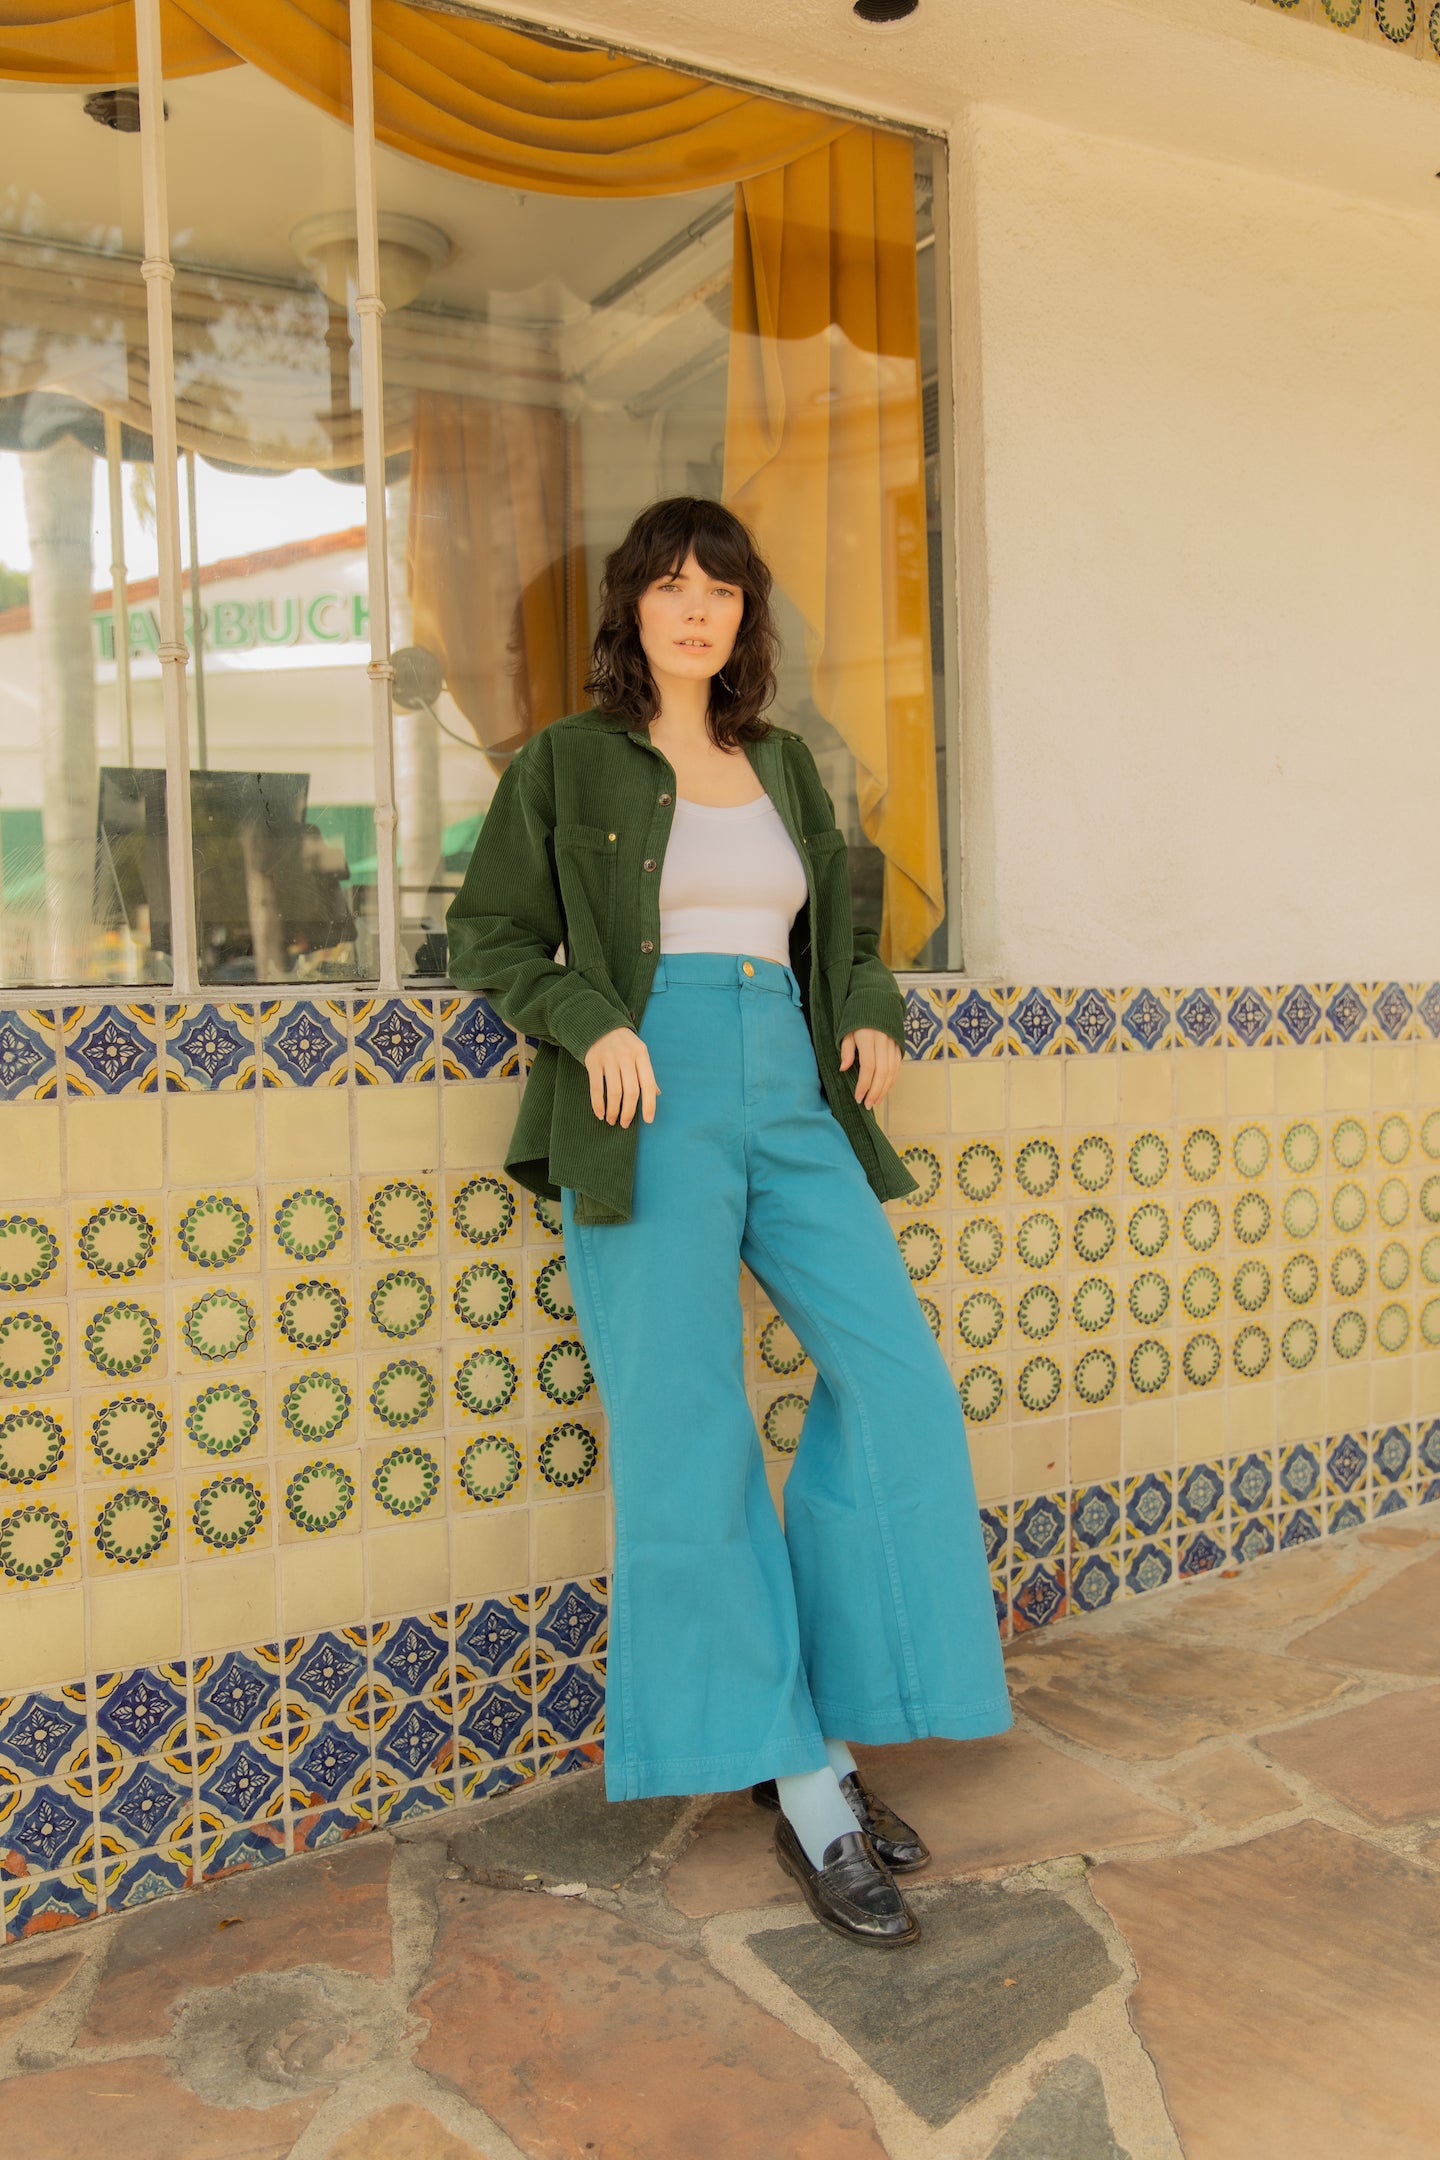 Dani is wearing Corduroy Overshirt in Swamp Green, Cropped Cami in Vintage Off-White and Bell Bottoms in Marine Blue